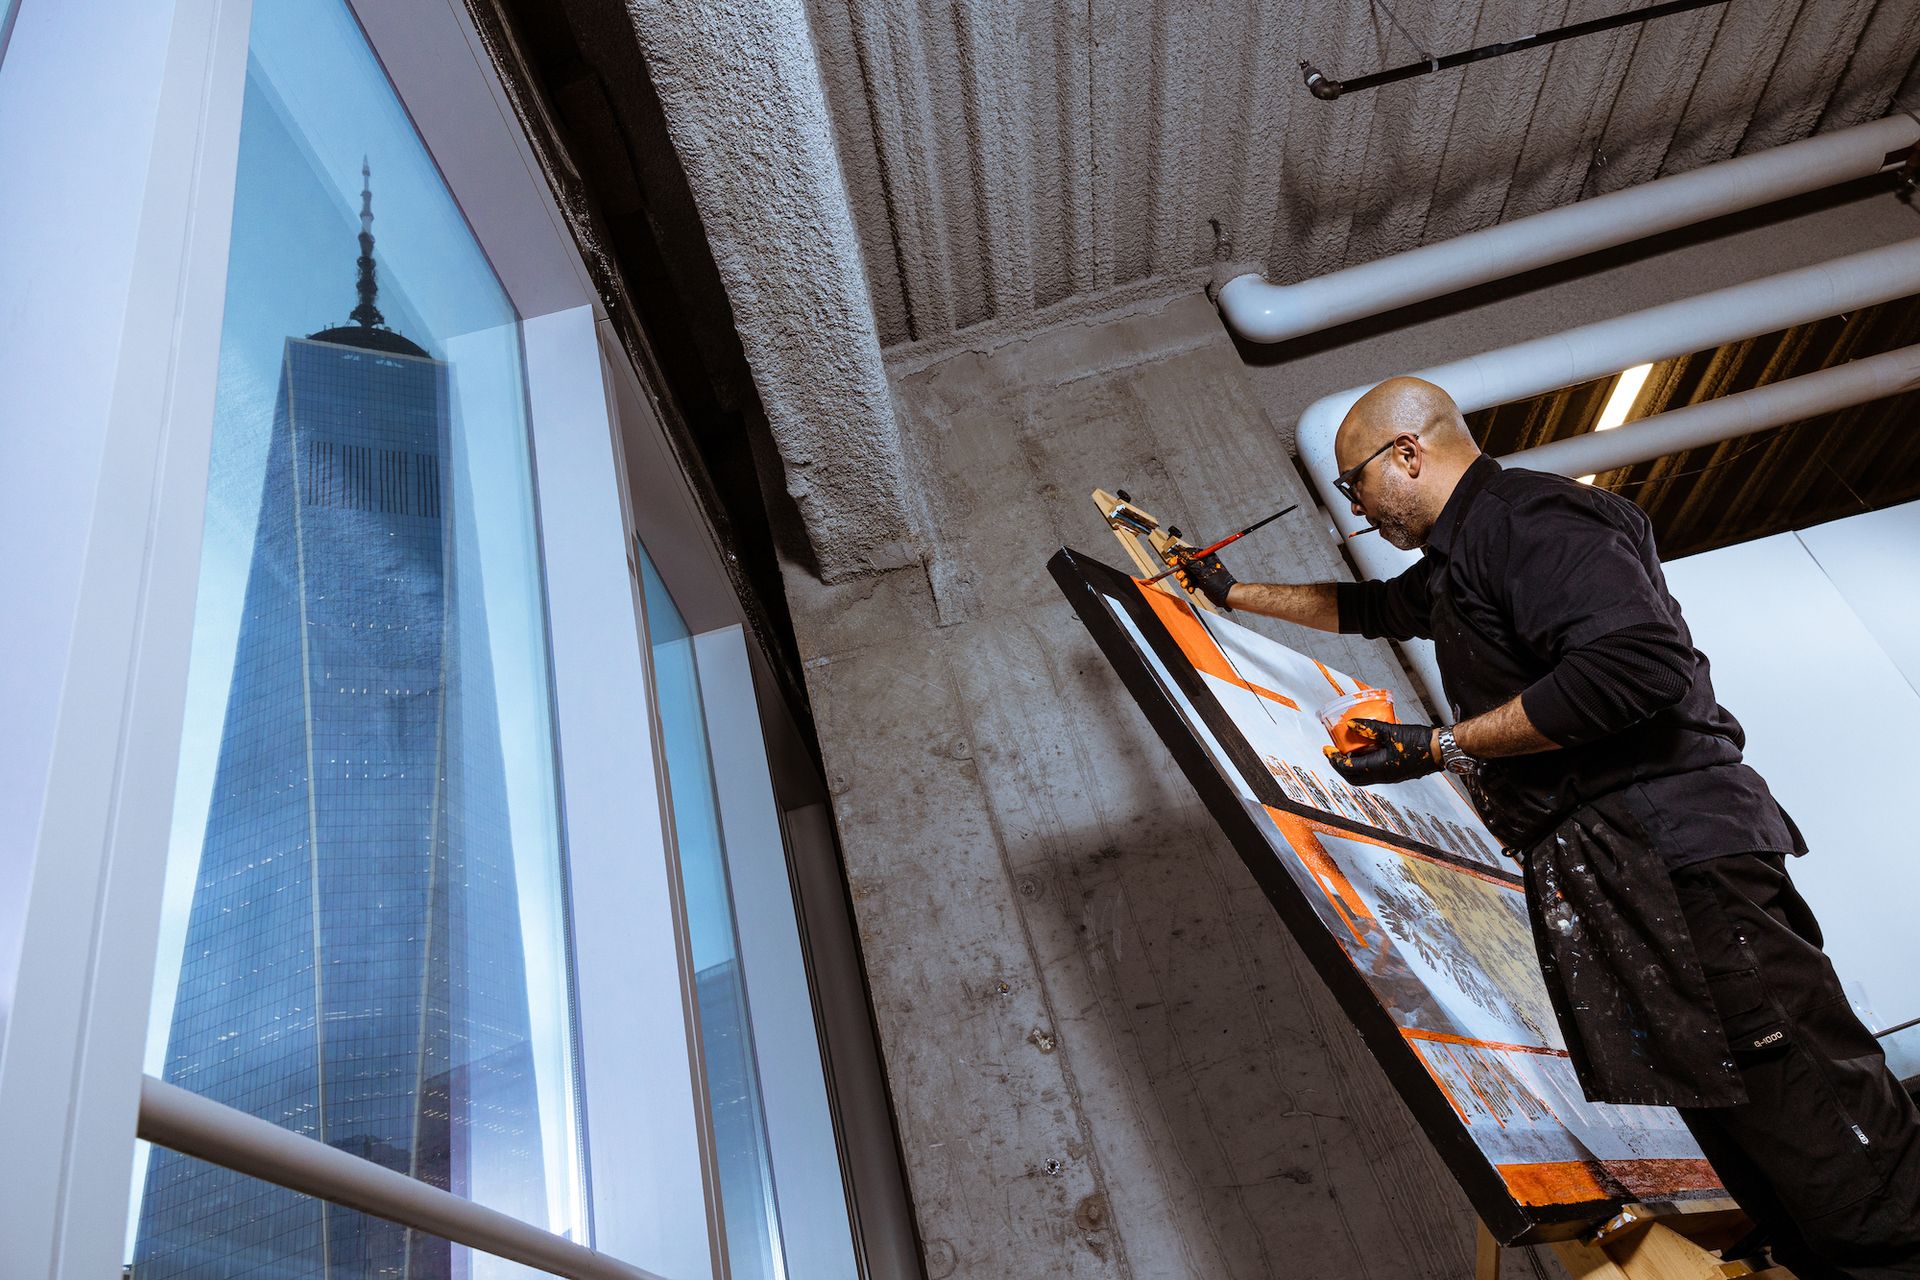 Artist Jared Owens working in his studio at 4 World Trade Center Photo by Josh Katz, courtesy Silver Art Projects